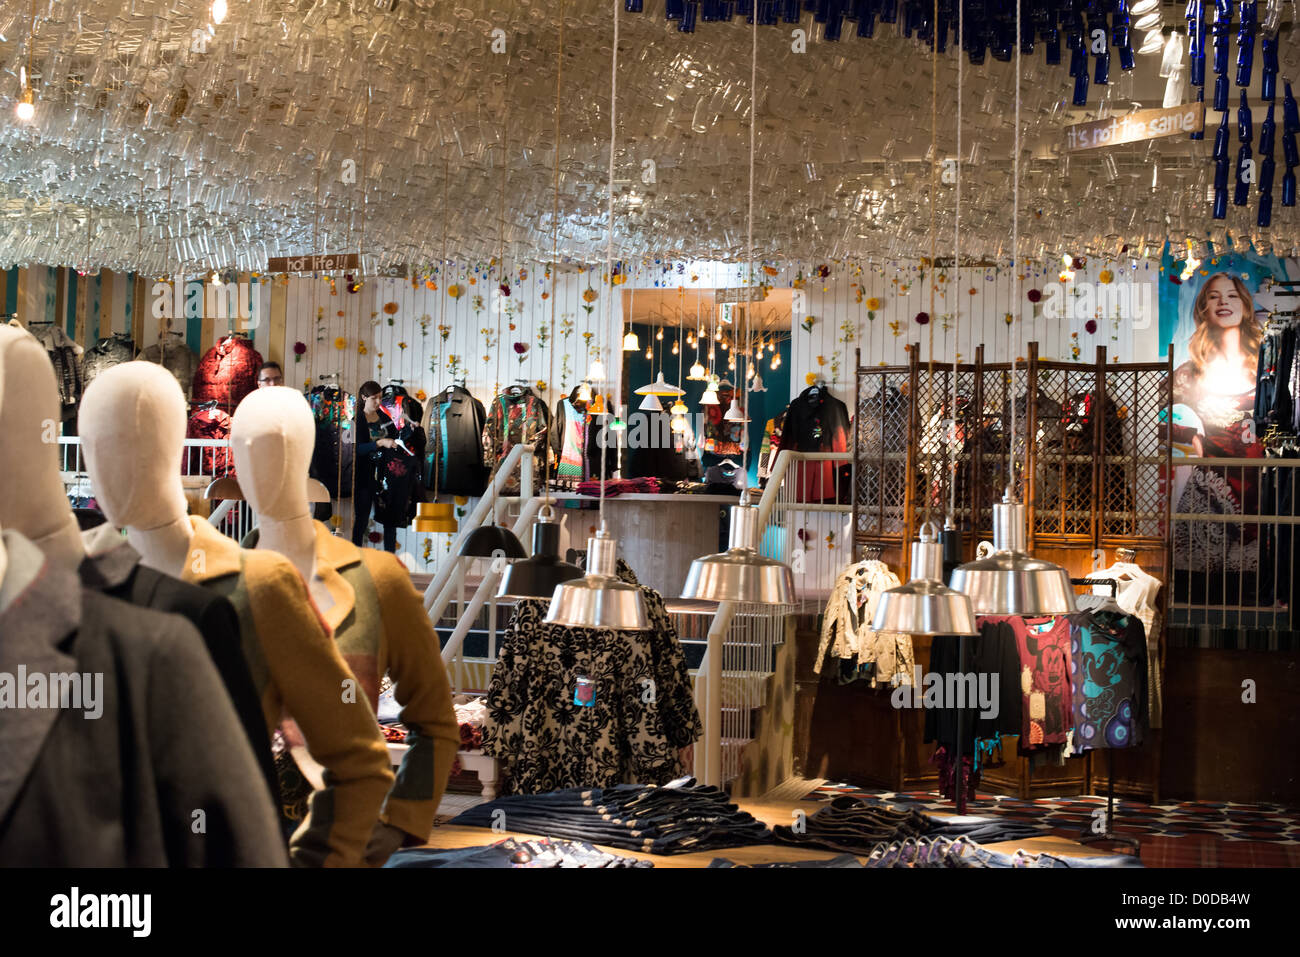 The Desigual fashion store on October 6, 2012 in Mariahilfer Street in  Vienna, Austria Stock Photo - Alamy